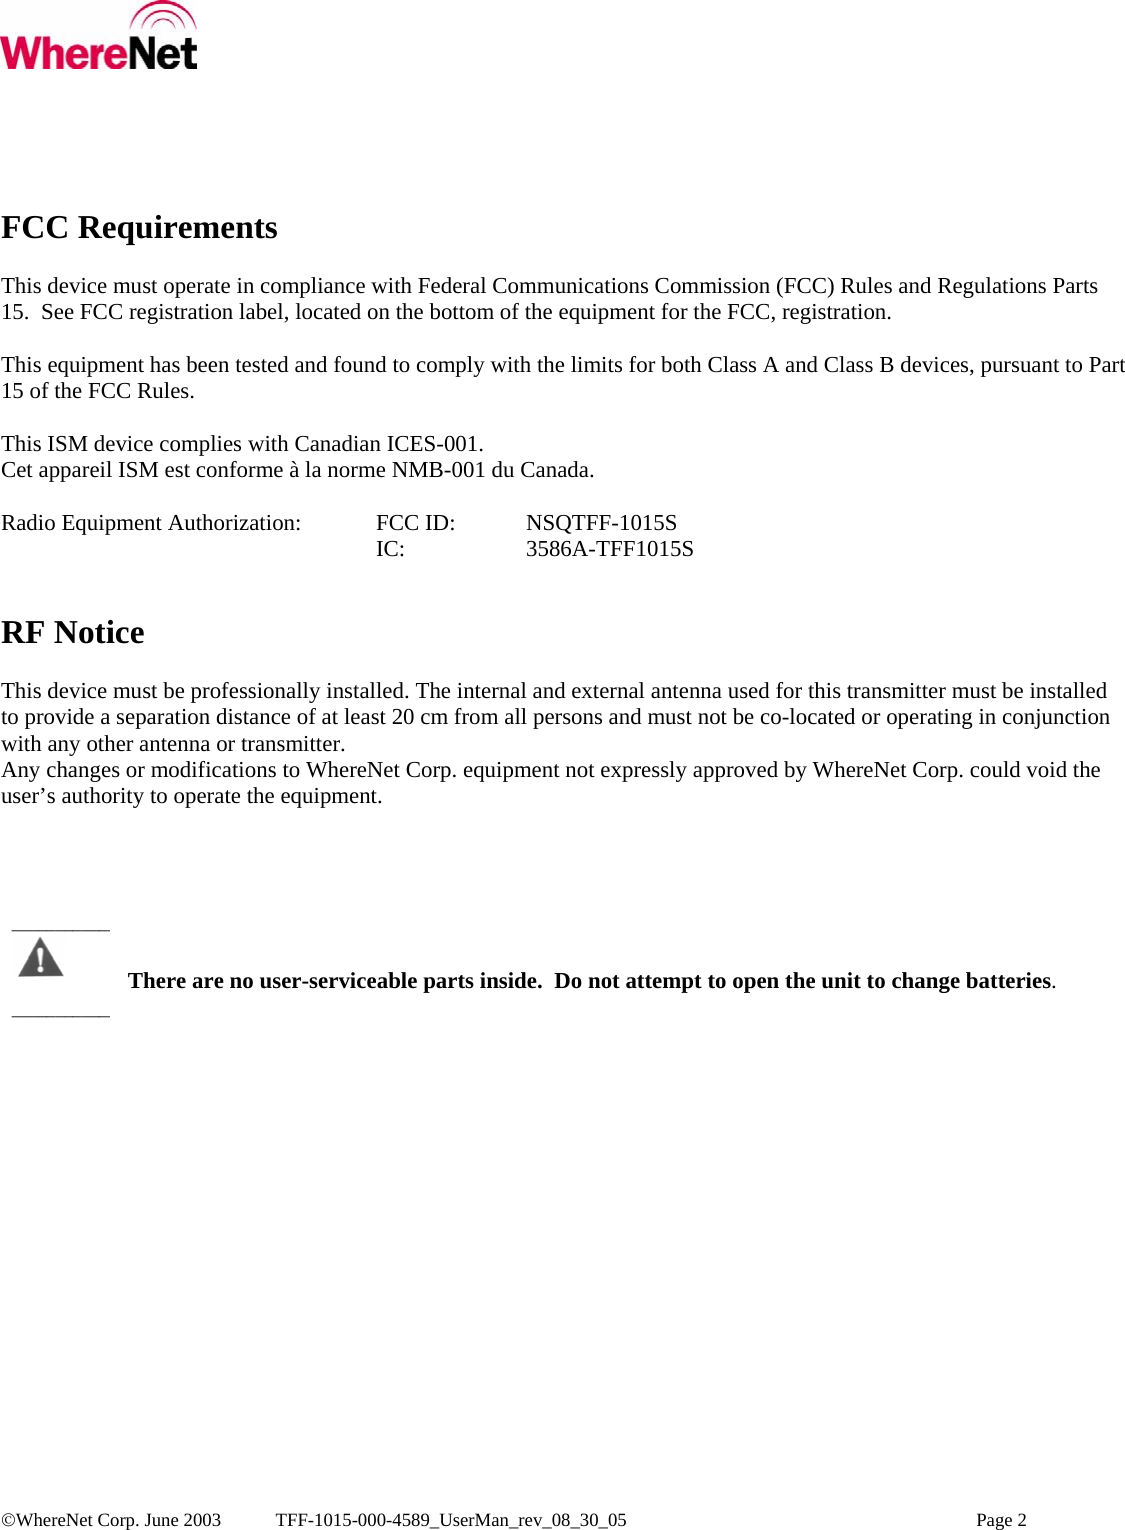  ©WhereNet Corp. June 2003  TFF-1015-000-4589_UserMan_rev_08_30_05    Page 2  FCC Requirements  This device must operate in compliance with Federal Communications Commission (FCC) Rules and Regulations Parts 15.  See FCC registration label, located on the bottom of the equipment for the FCC, registration.  This equipment has been tested and found to comply with the limits for both Class A and Class B devices, pursuant to Part 15 of the FCC Rules.  This ISM device complies with Canadian ICES-001. Cet appareil ISM est conforme à la norme NMB-001 du Canada.  Radio Equipment Authorization:  FCC ID:   NSQTFF-1015S      IC:   3586A-TFF1015S   RF Notice  This device must be professionally installed. The internal and external antenna used for this transmitter must be installed to provide a separation distance of at least 20 cm from all persons and must not be co-located or operating in conjunction with any other antenna or transmitter. Any changes or modifications to WhereNet Corp. equipment not expressly approved by WhereNet Corp. could void the user’s authority to operate the equipment.       There are no user-serviceable parts inside.  Do not attempt to open the unit to change batteries. ________________________